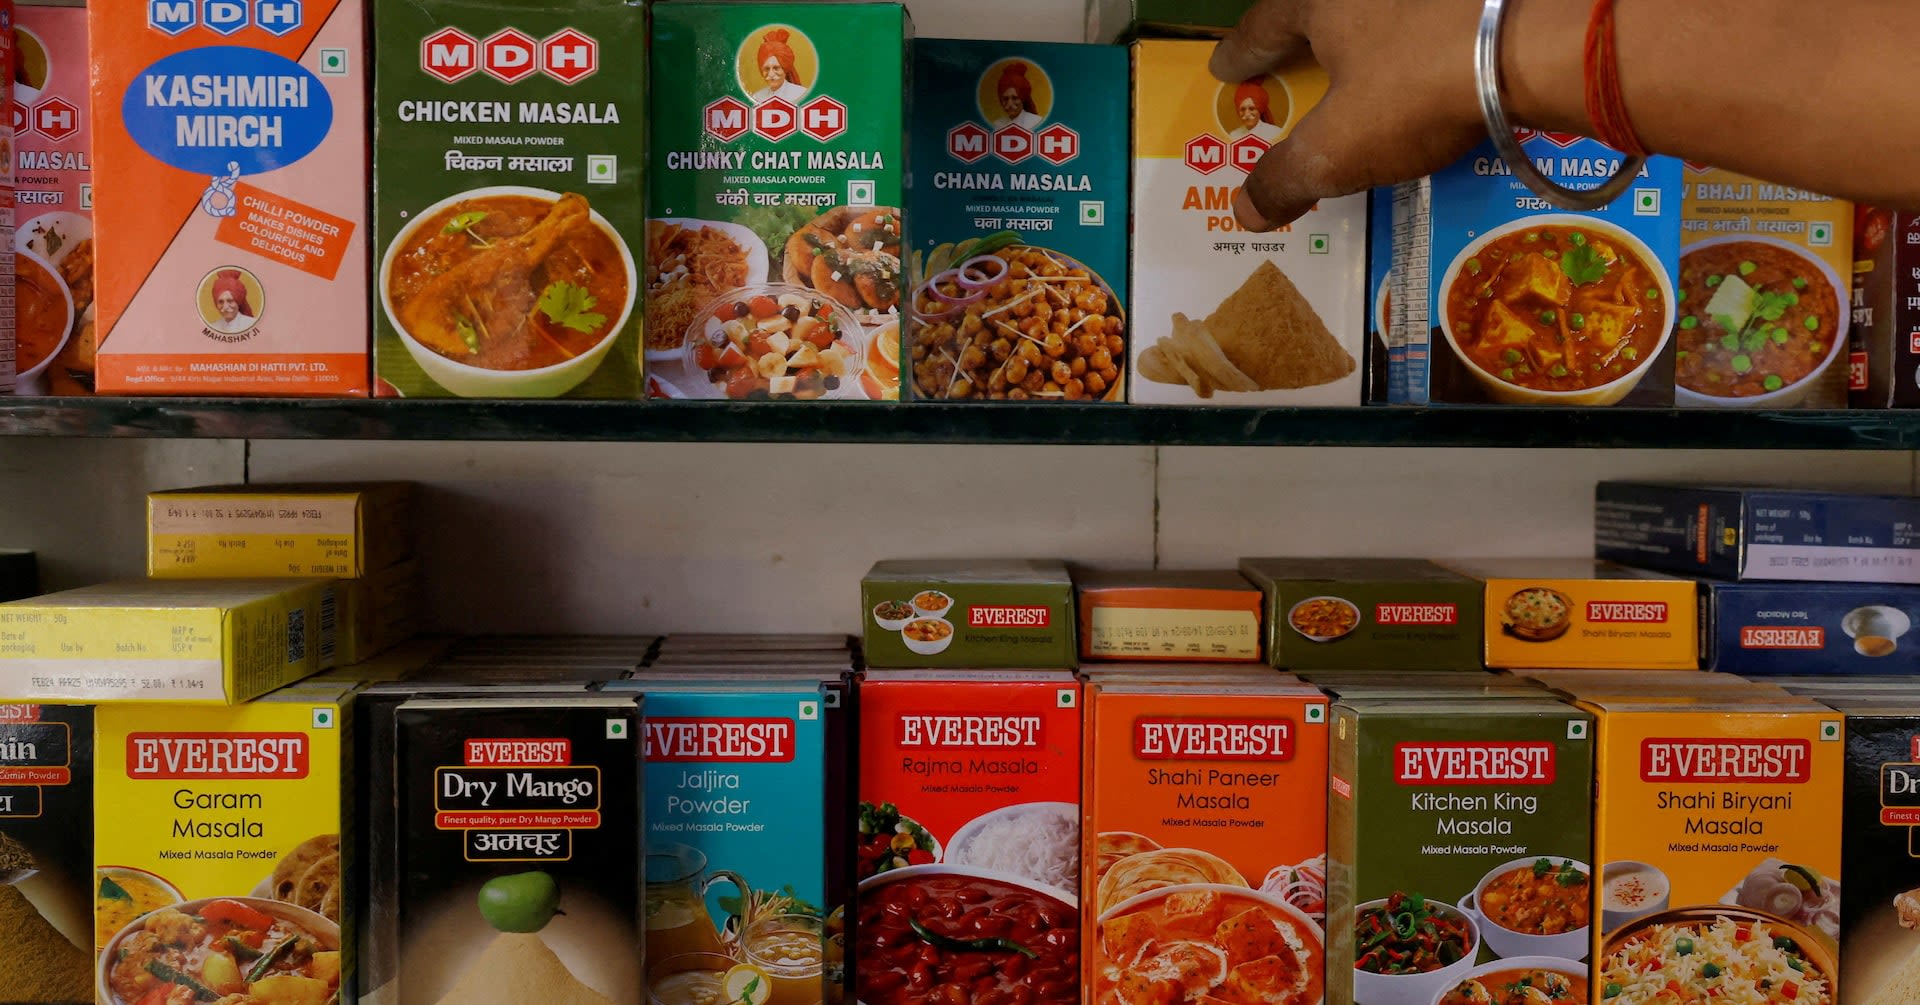 Who are the two iconic Indian spice brands under scrutiny?